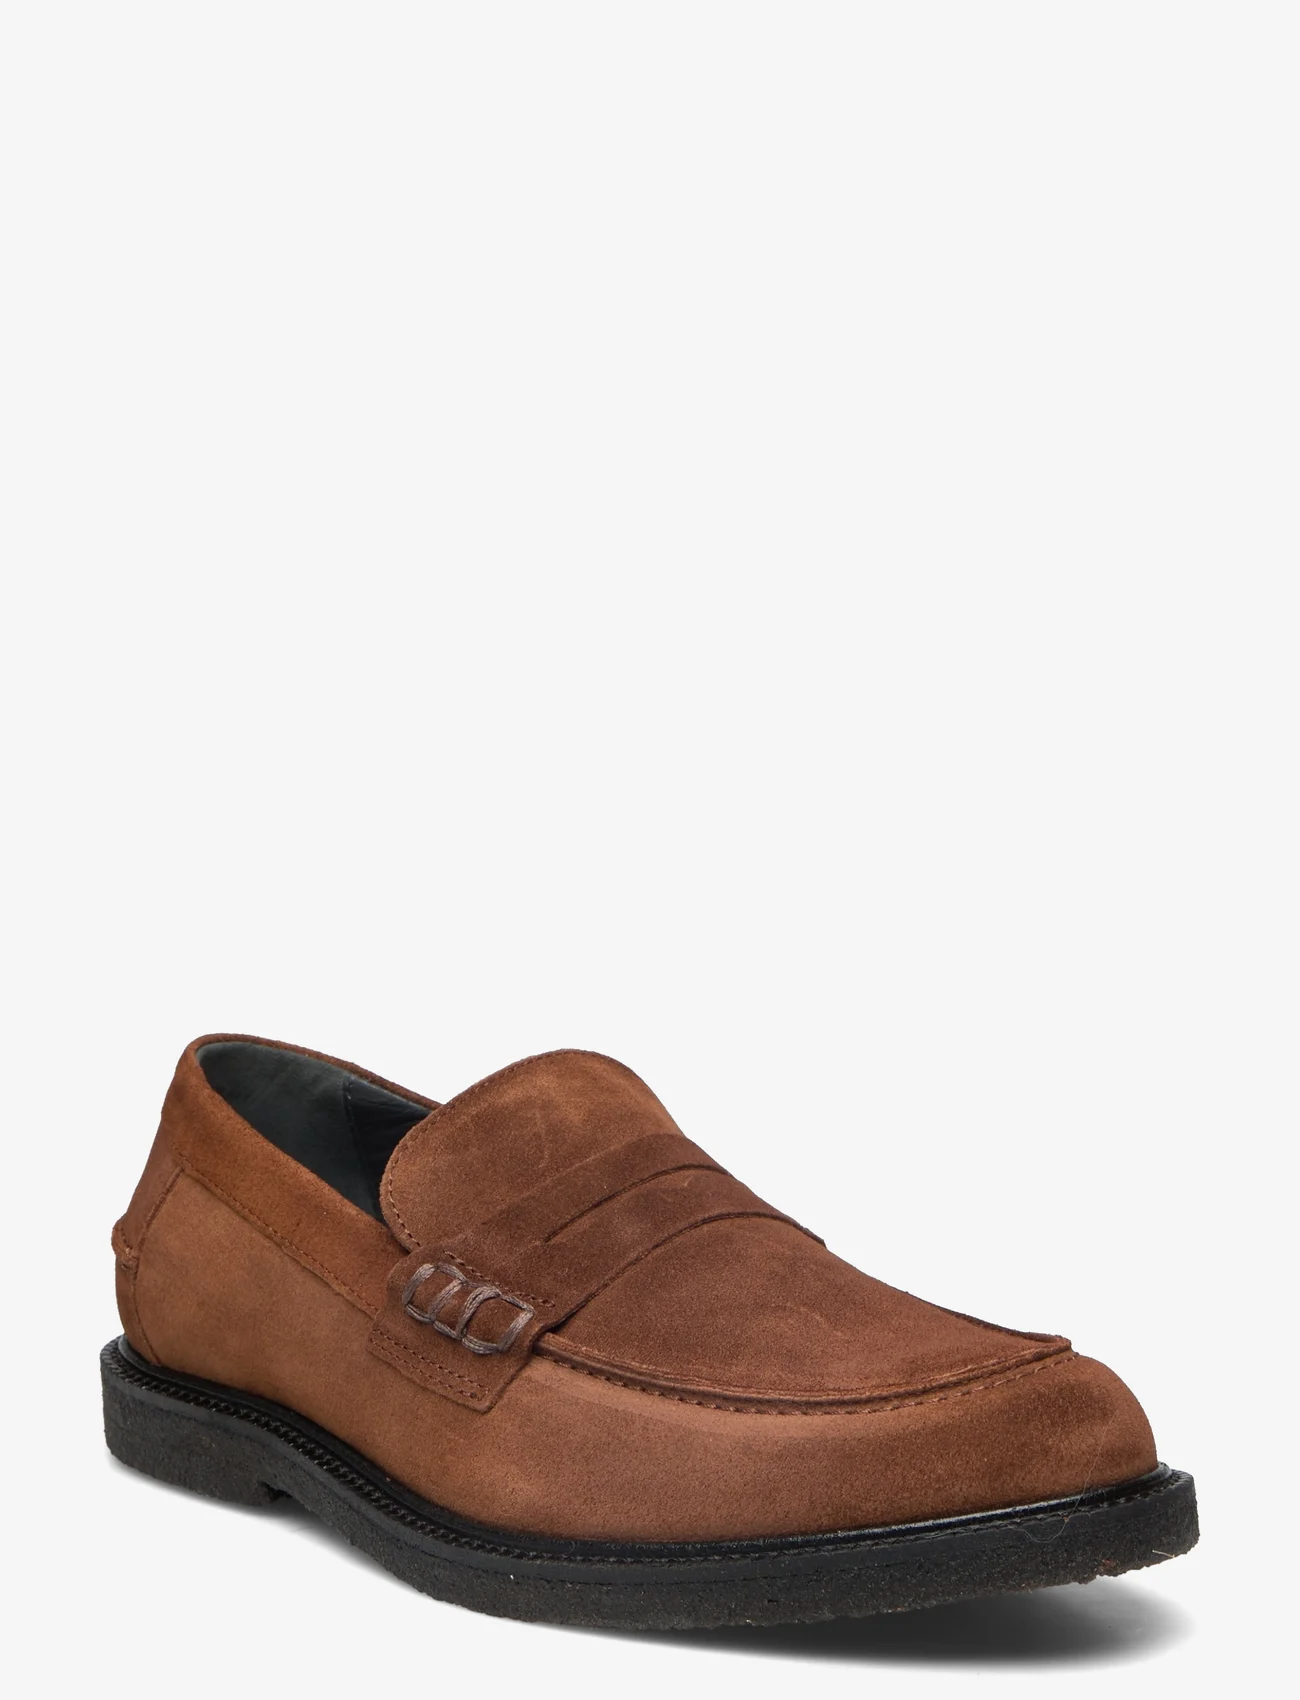 ANGULUS - Loafer - birthday gifts - 2231 brown - 0